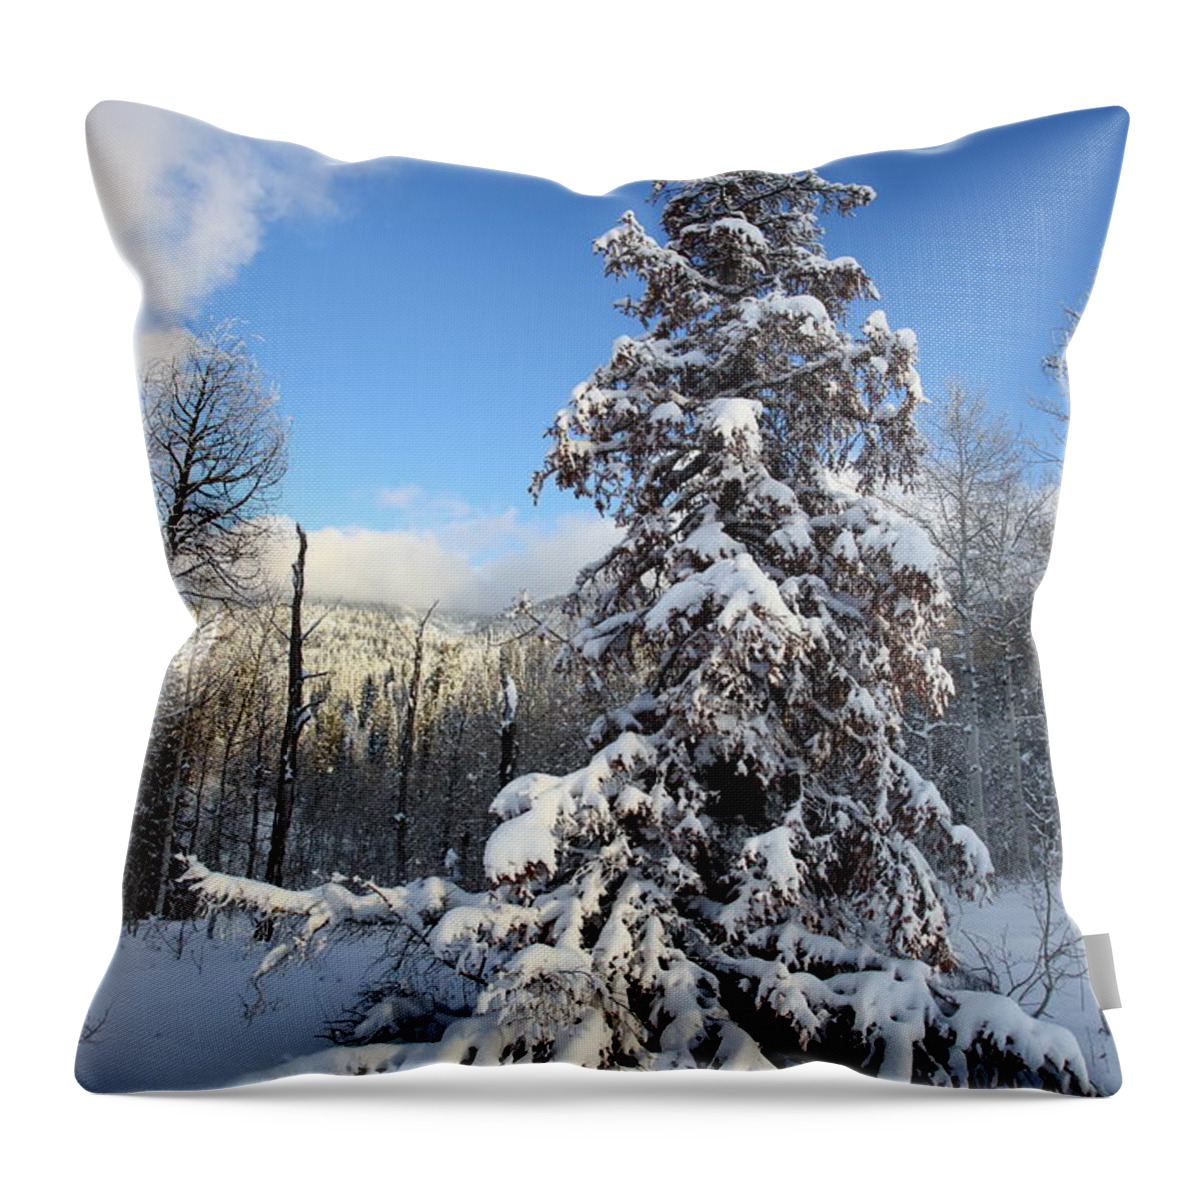 Cold Throw Pillow featuring the photograph Wild Christmas Tree by David Andersen